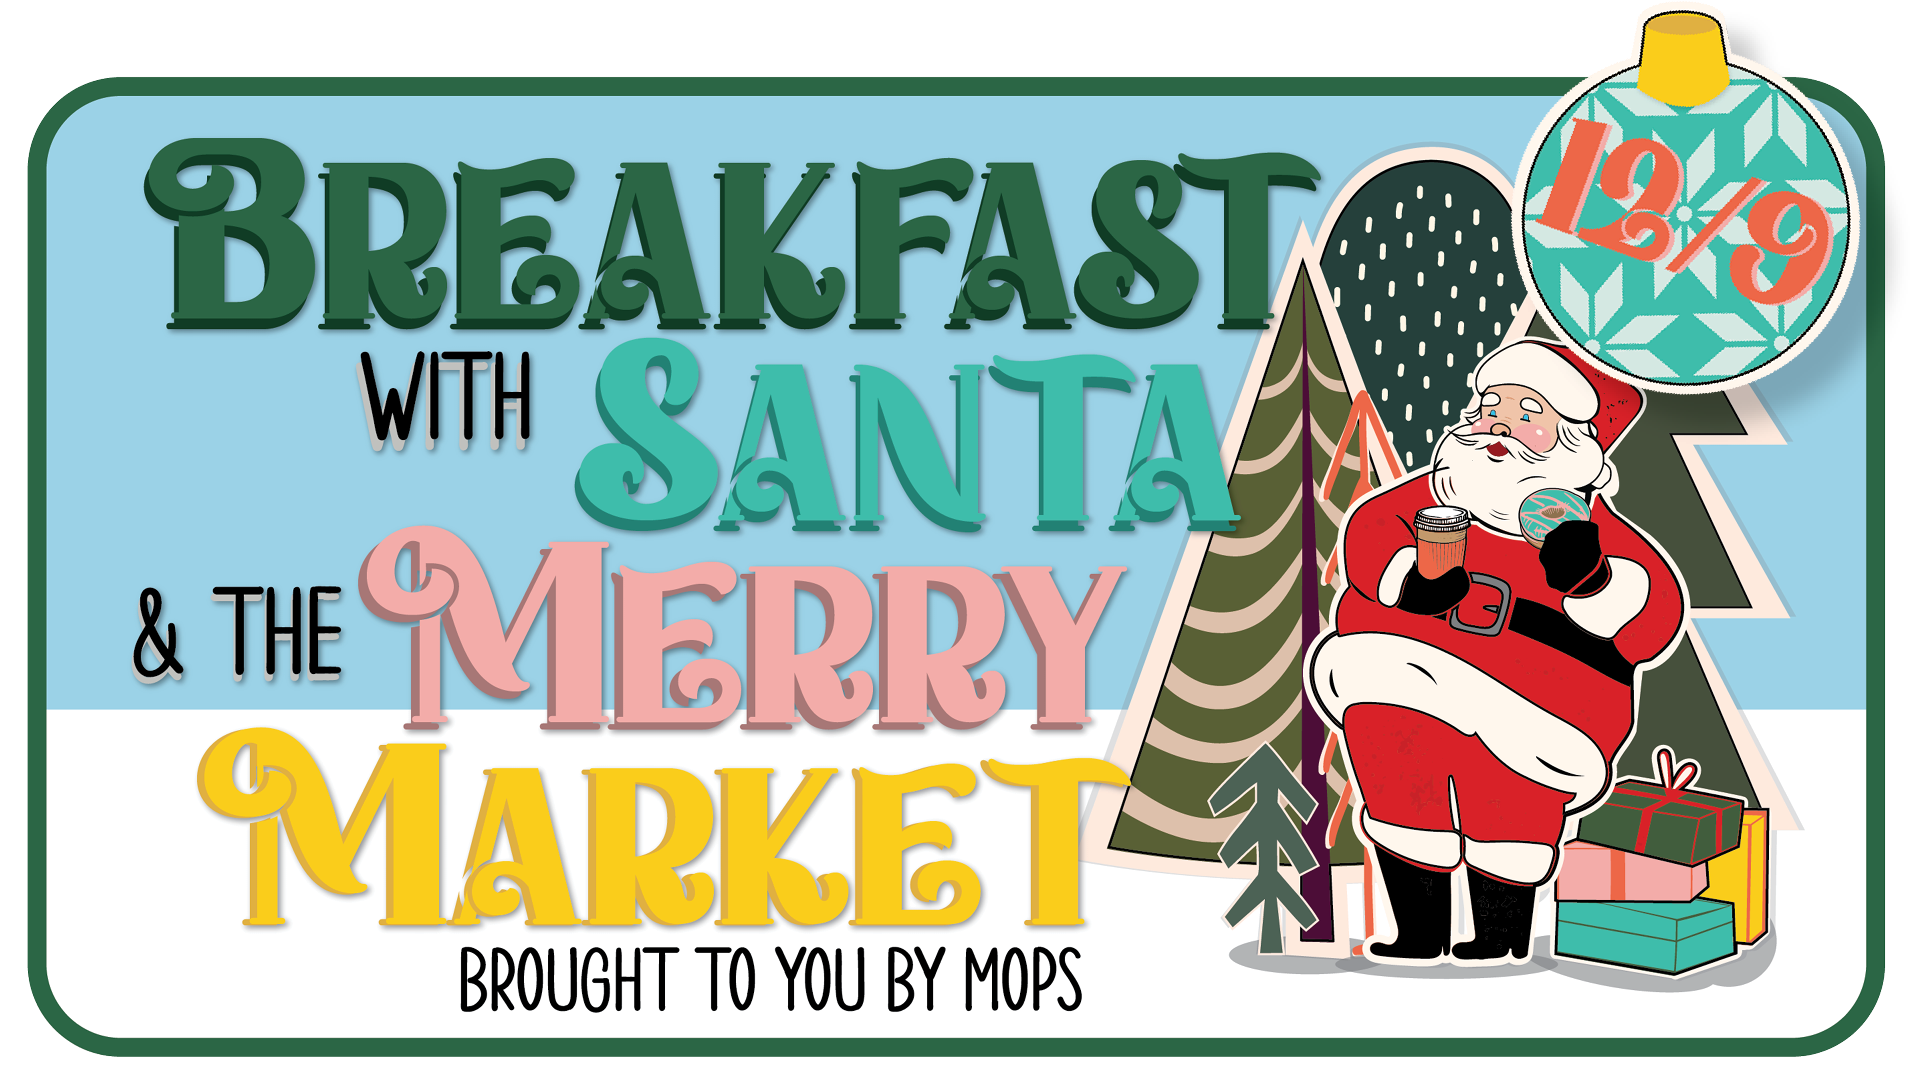 Breakfast and pictures with Santa - 8am -11am. Merry Market shopping local vendors - 8am - 1pm.